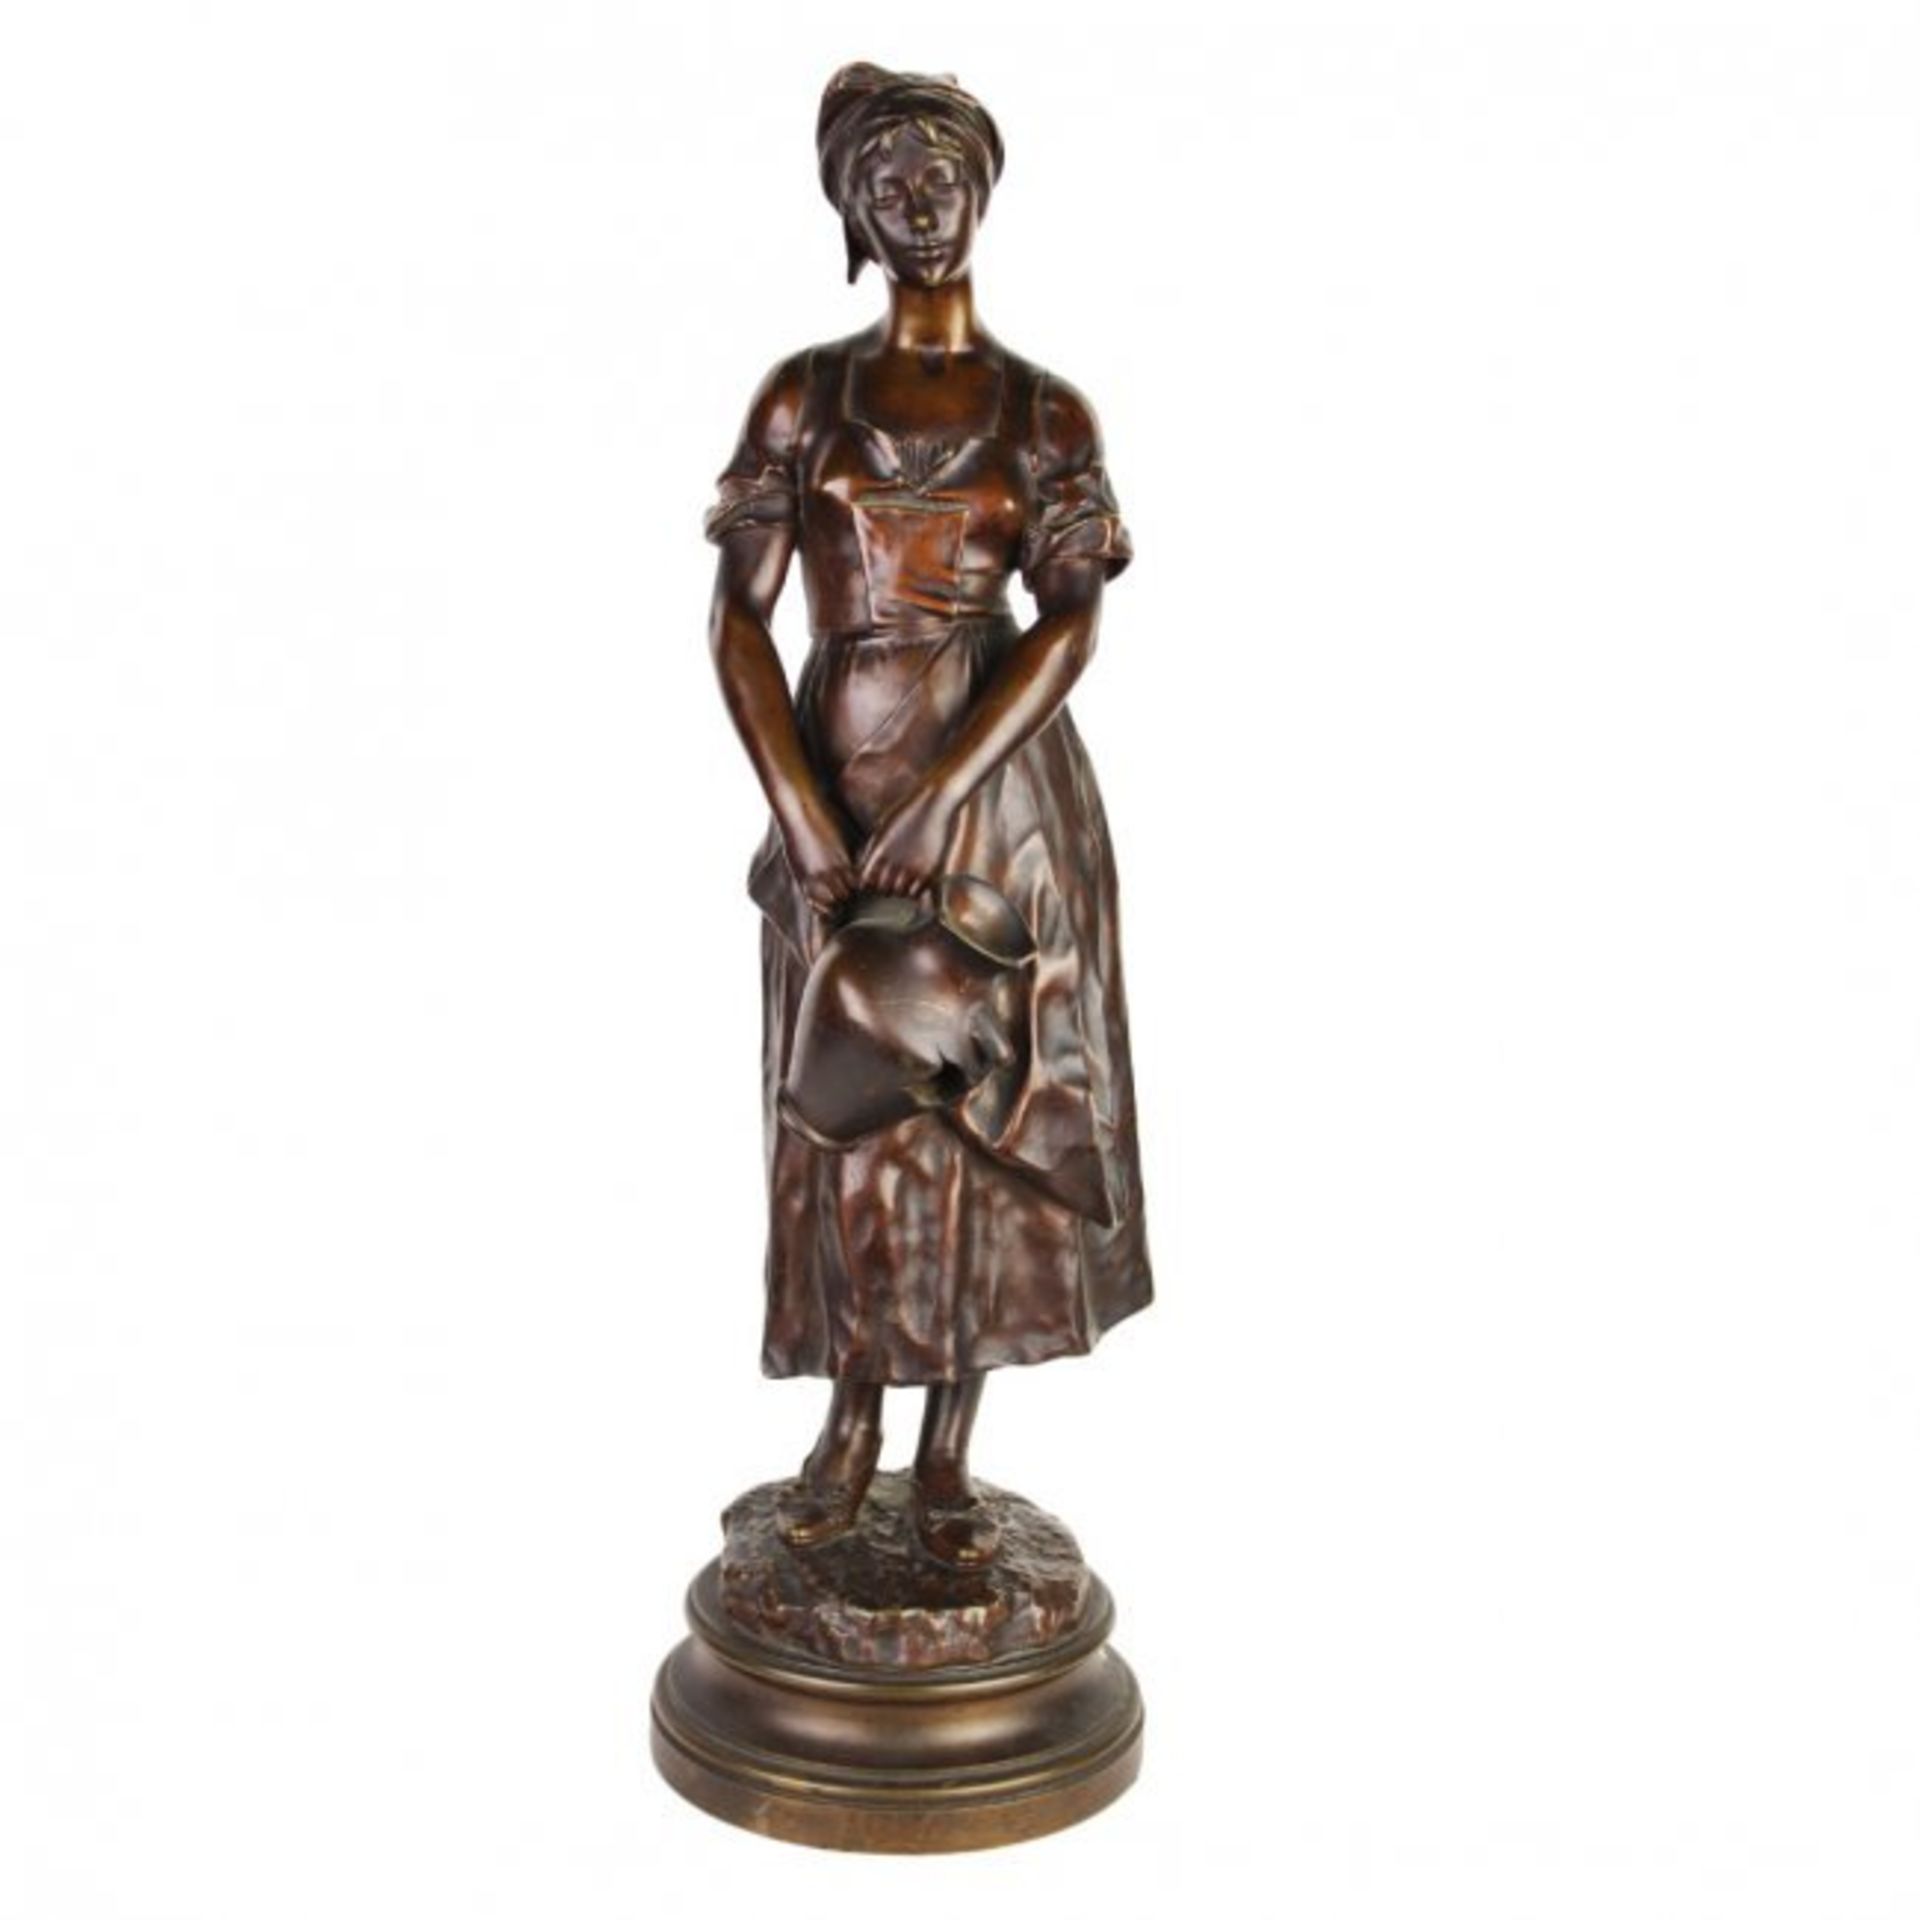 ANATOLE J. GUILLOT BRONZE SCULPTURE “WOMAN WITH...